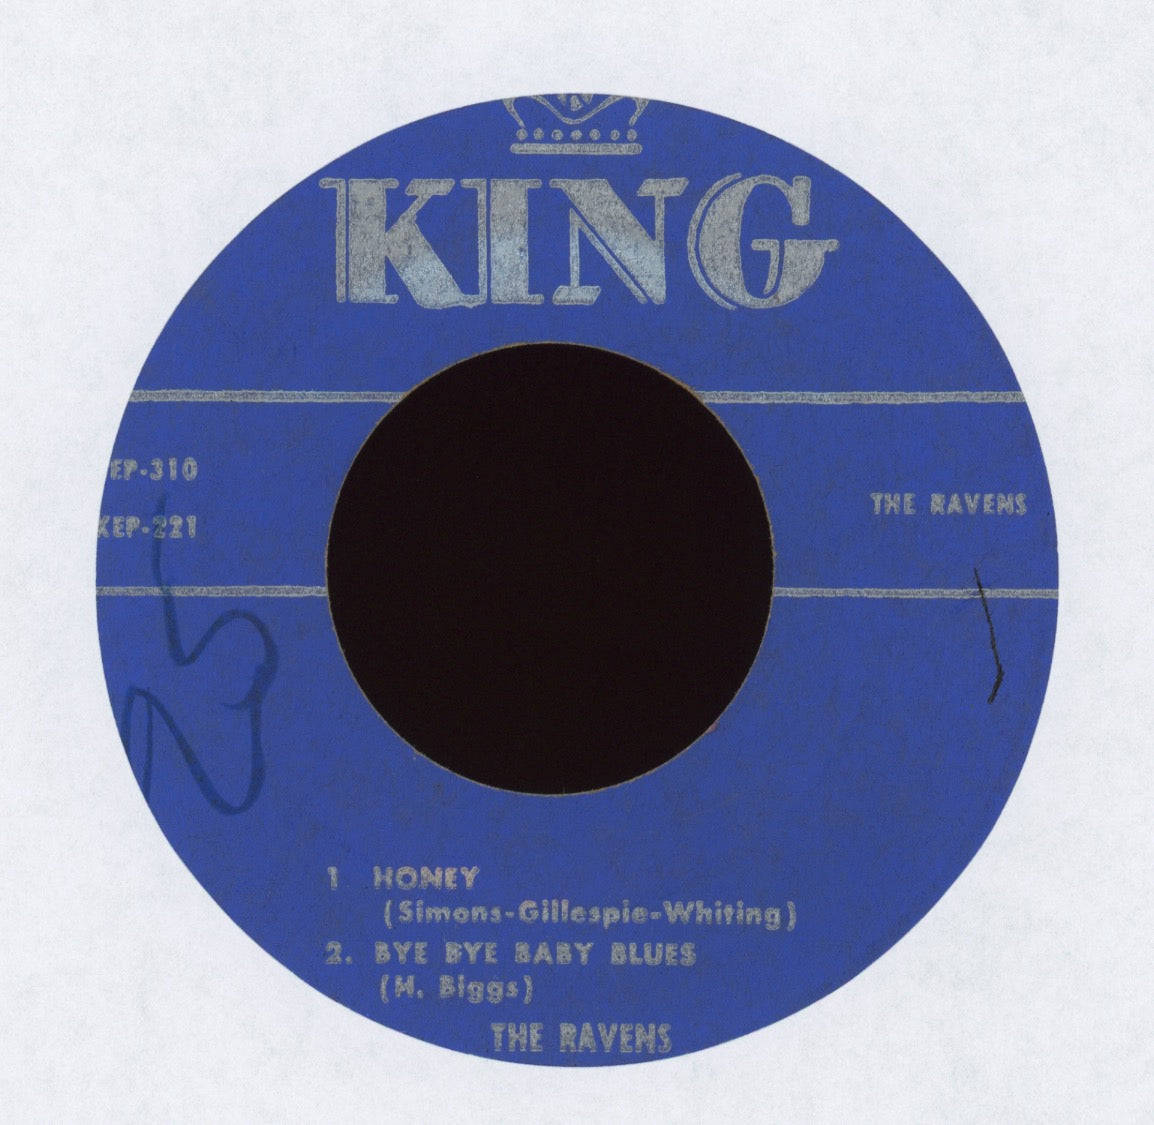 The Ravens - Honey on King EP-310 Rare 45 EP No Cover